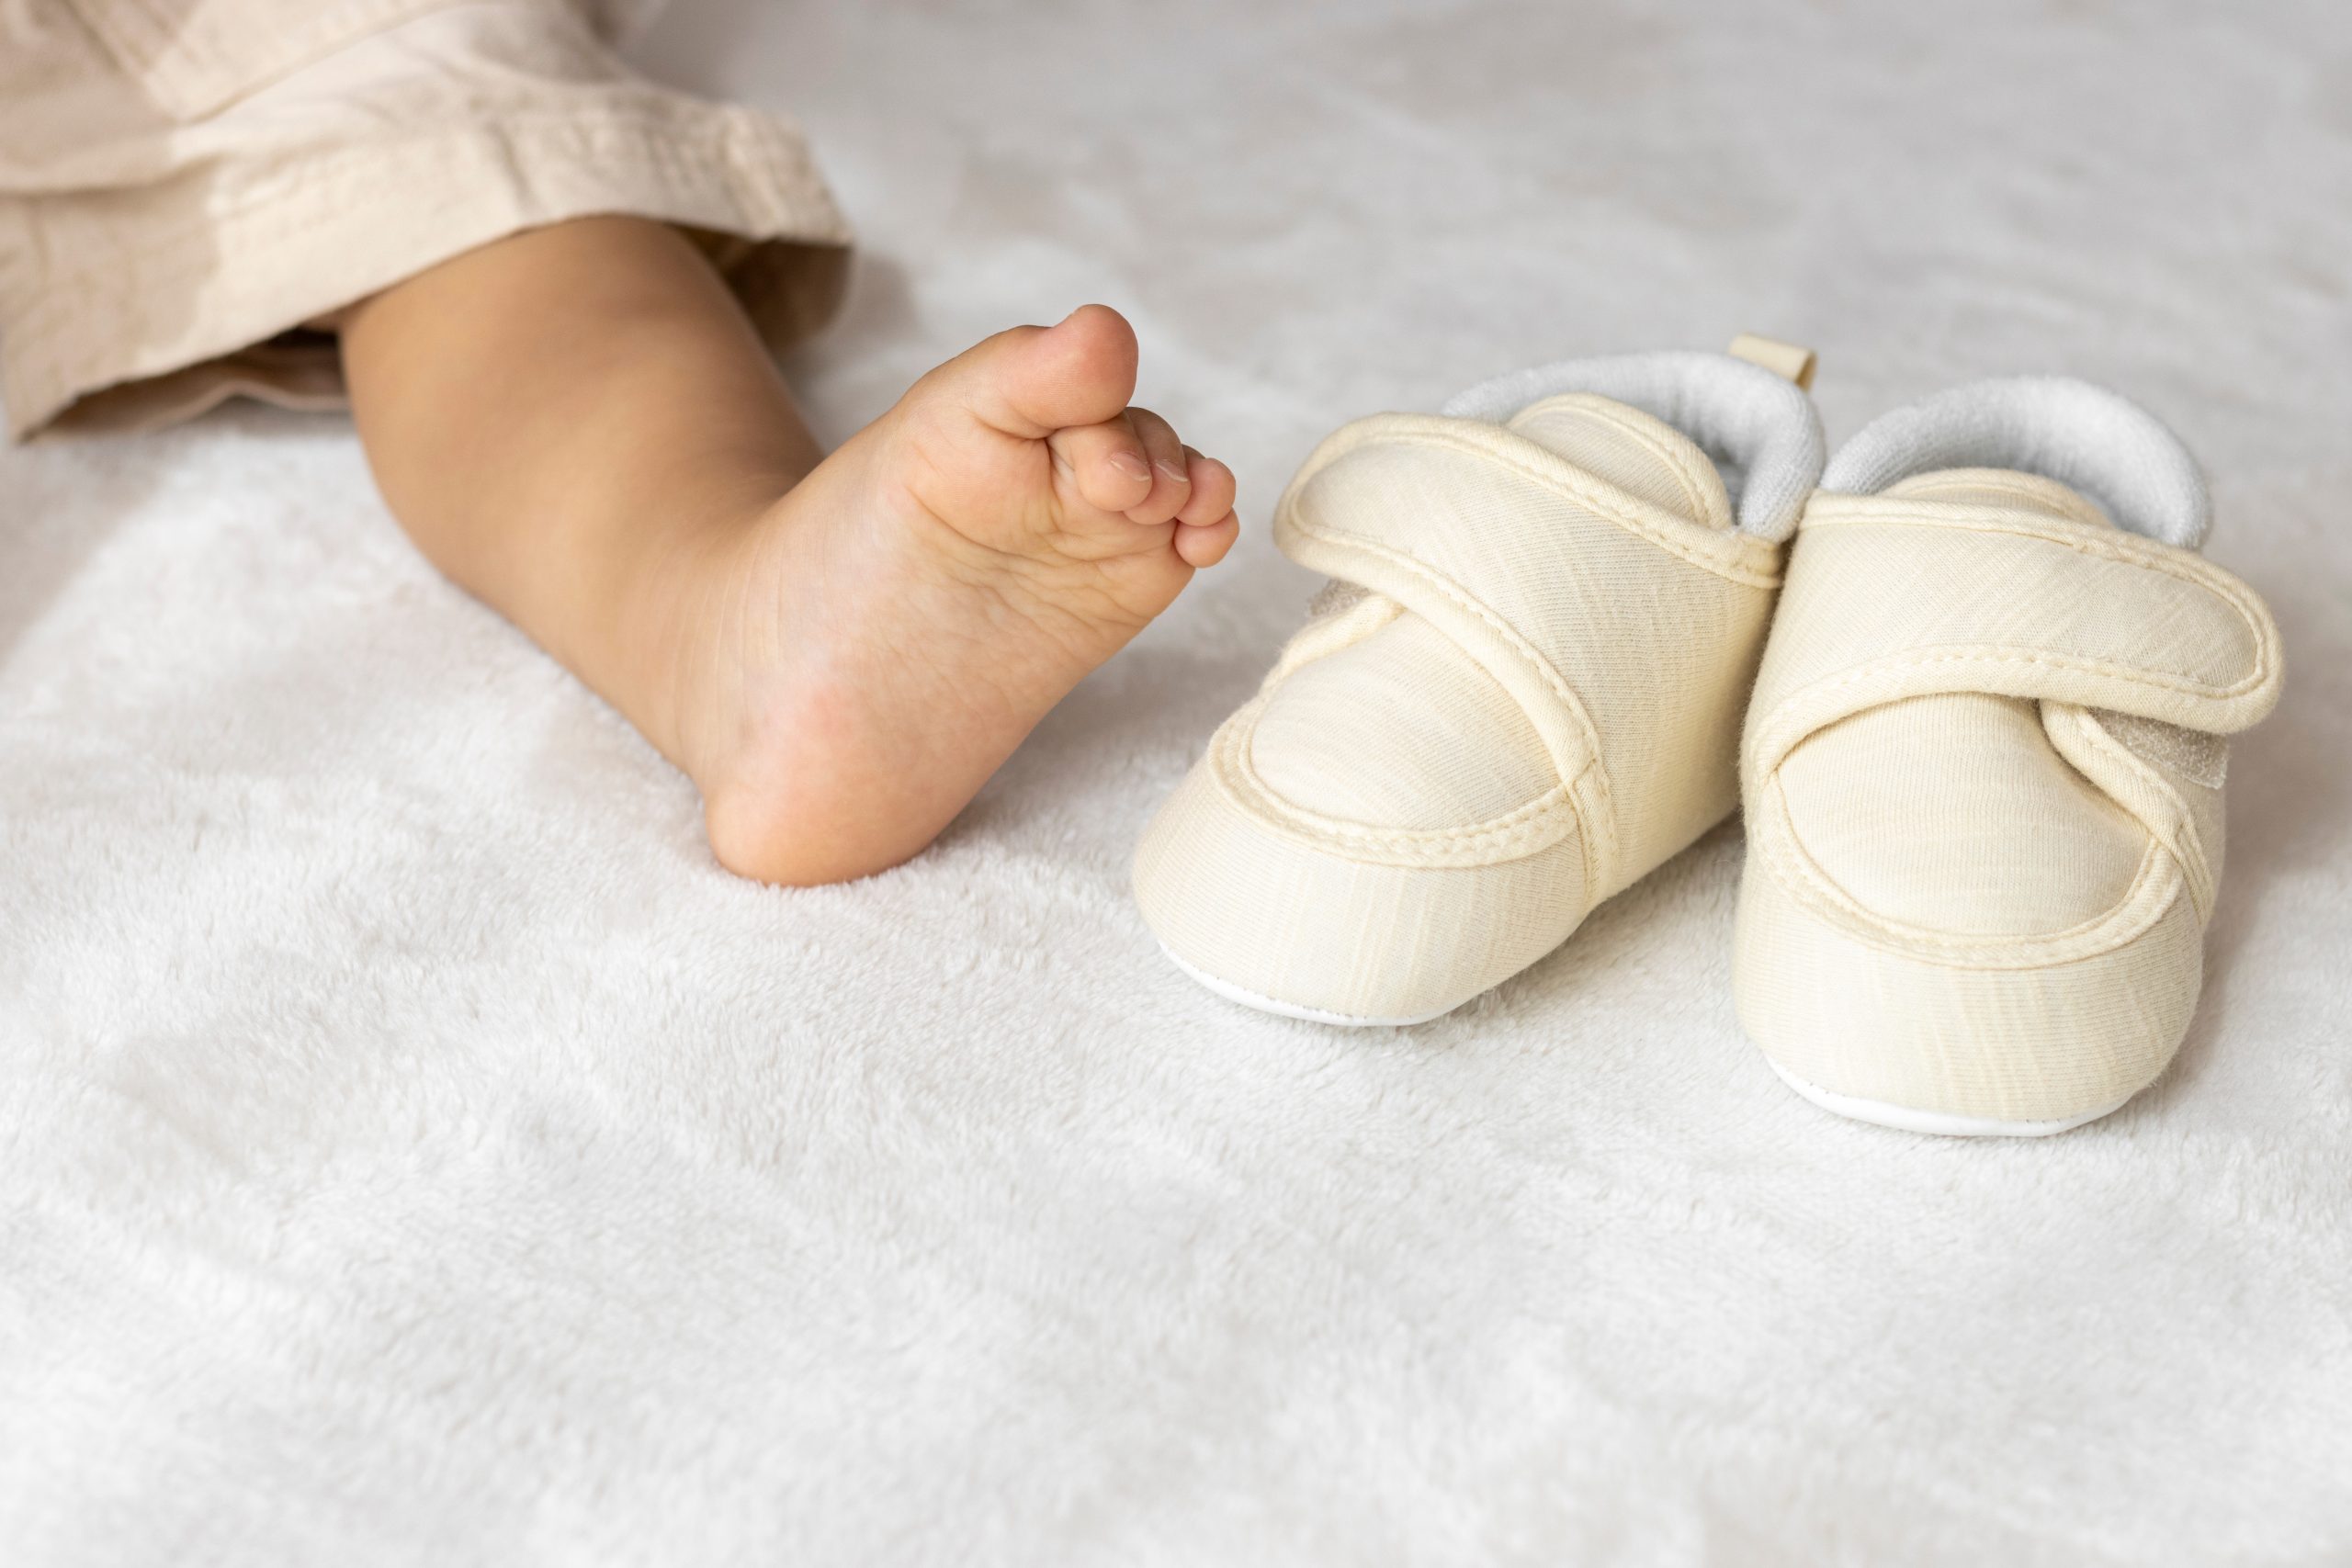 How to help your child go from booties to baby shoes in a few easy steps